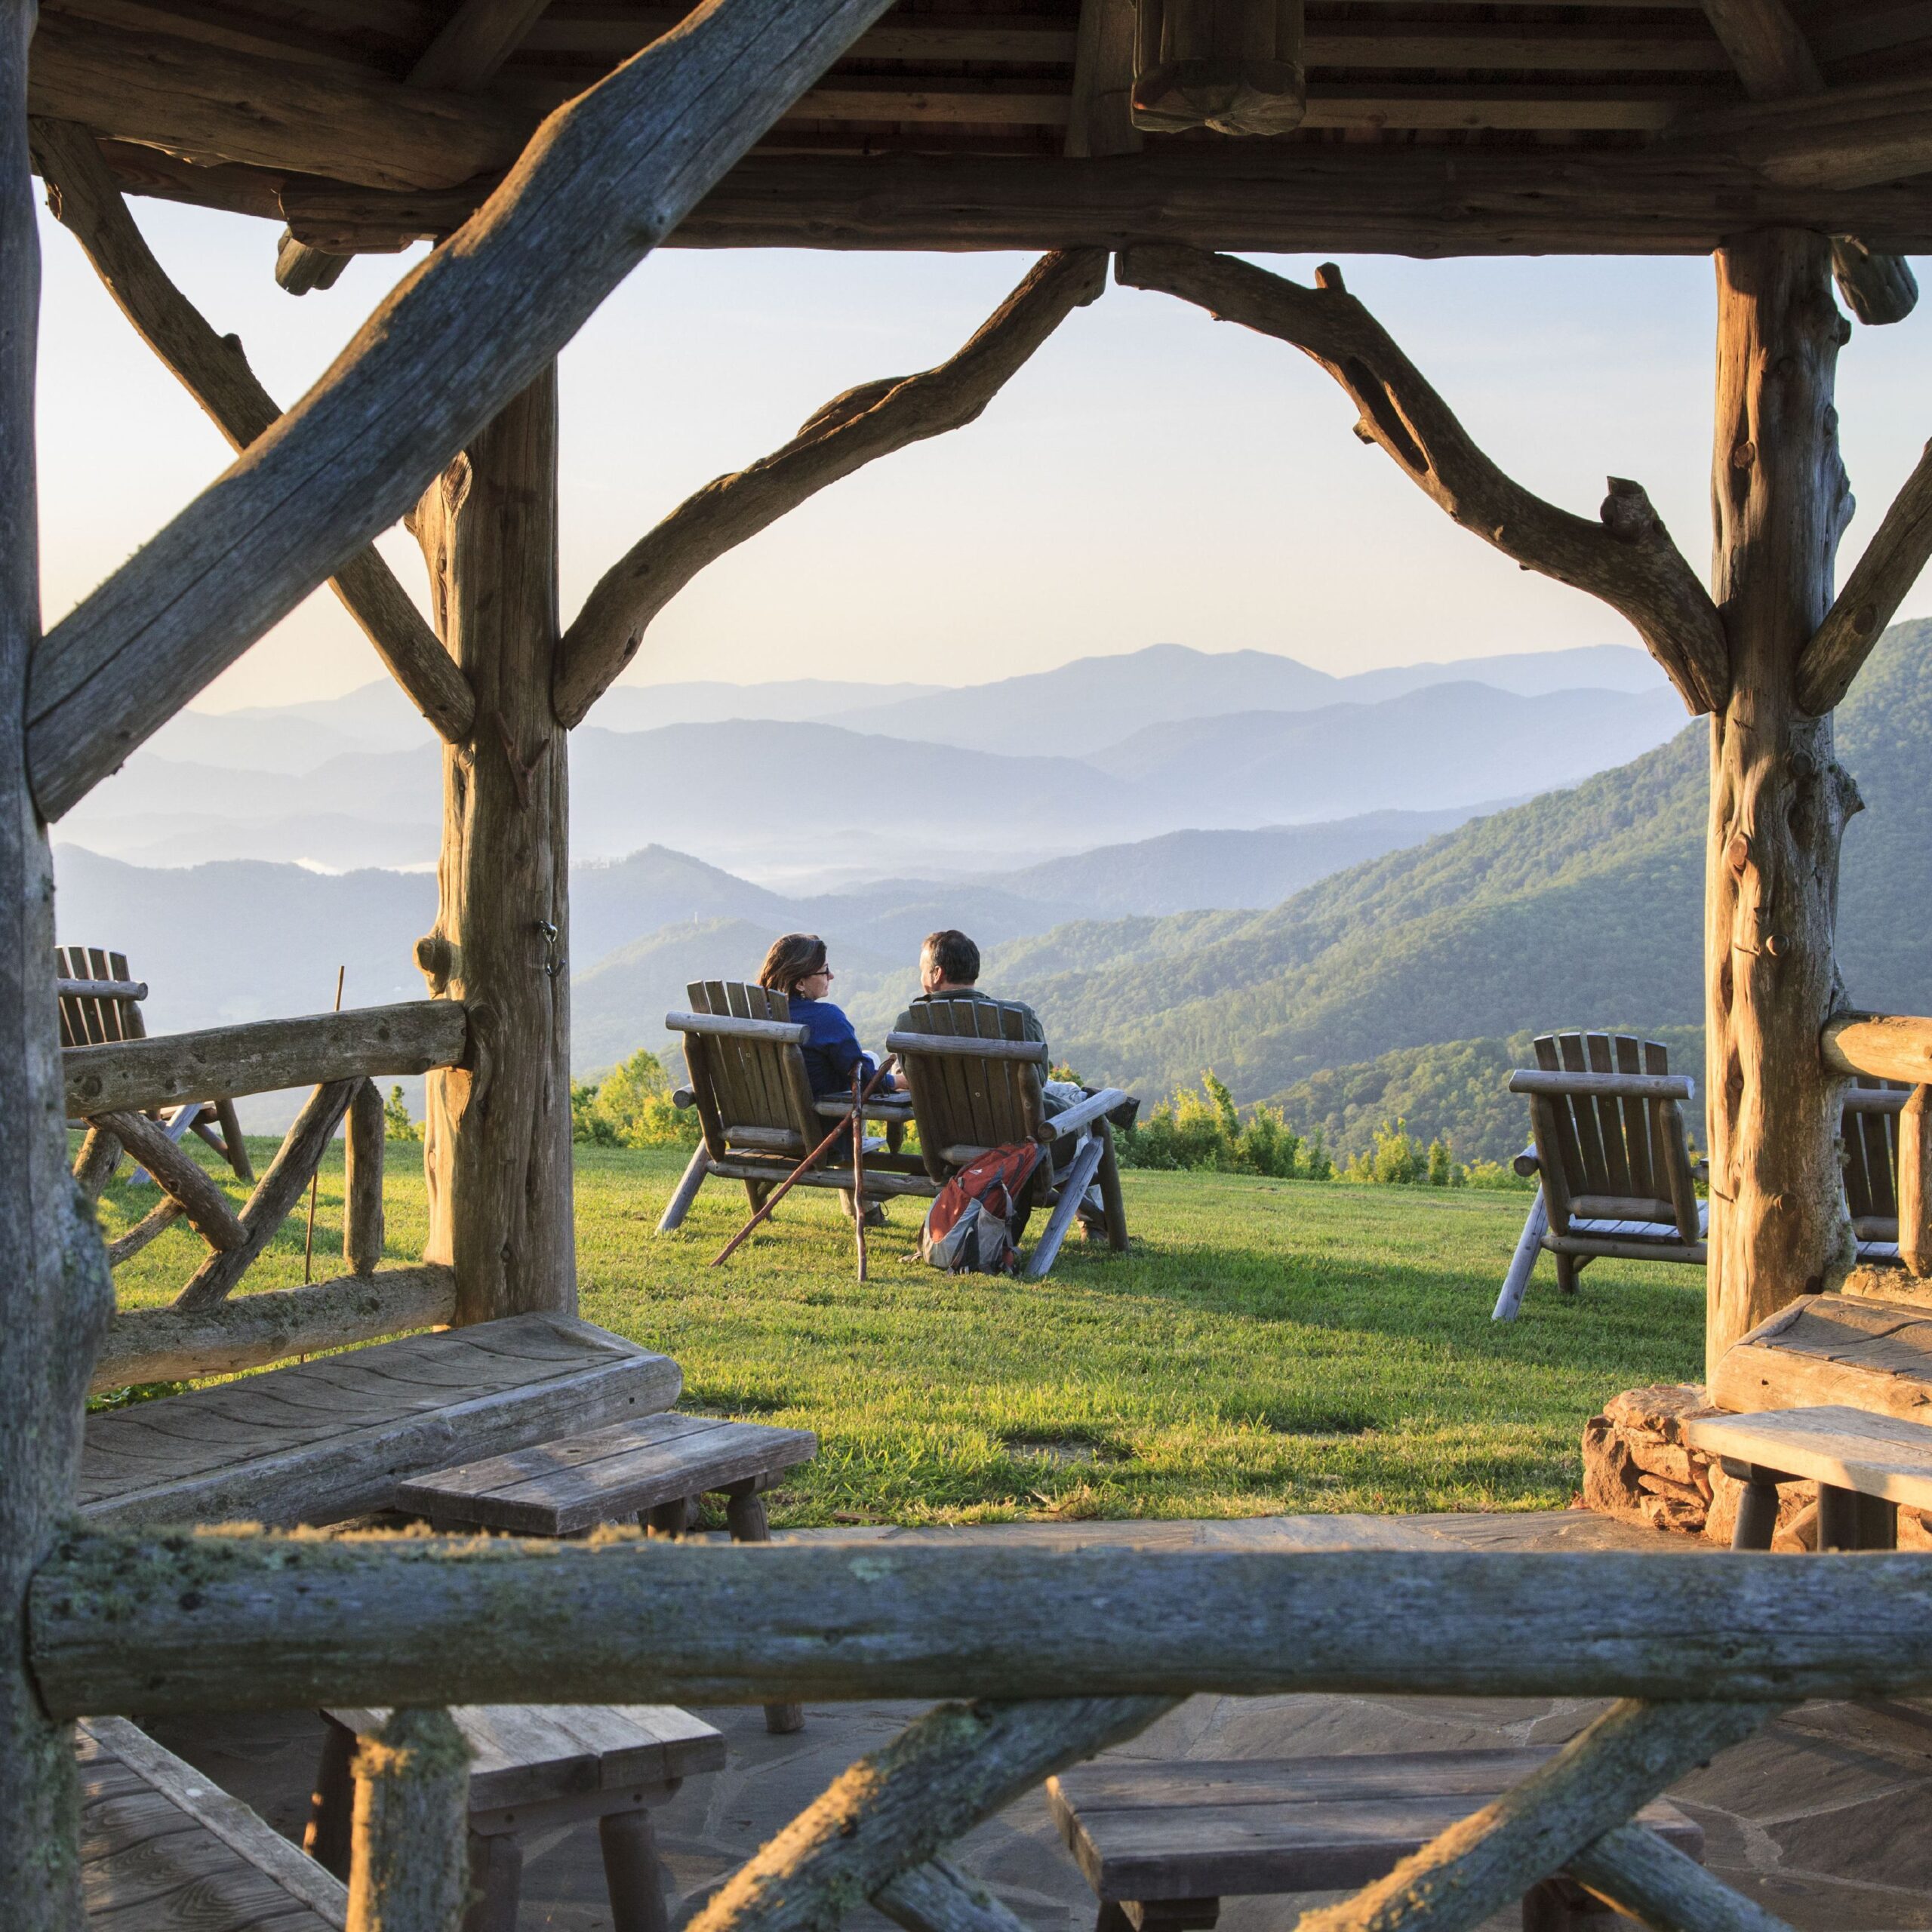 couple-relaxing-in-gazebo-on-grounds-maggie-valley--north-carolina--usa-746029093-d2712630da9a4beeb77a2bc48919d297-4f16a5b780ab46f9afdeff2423385676